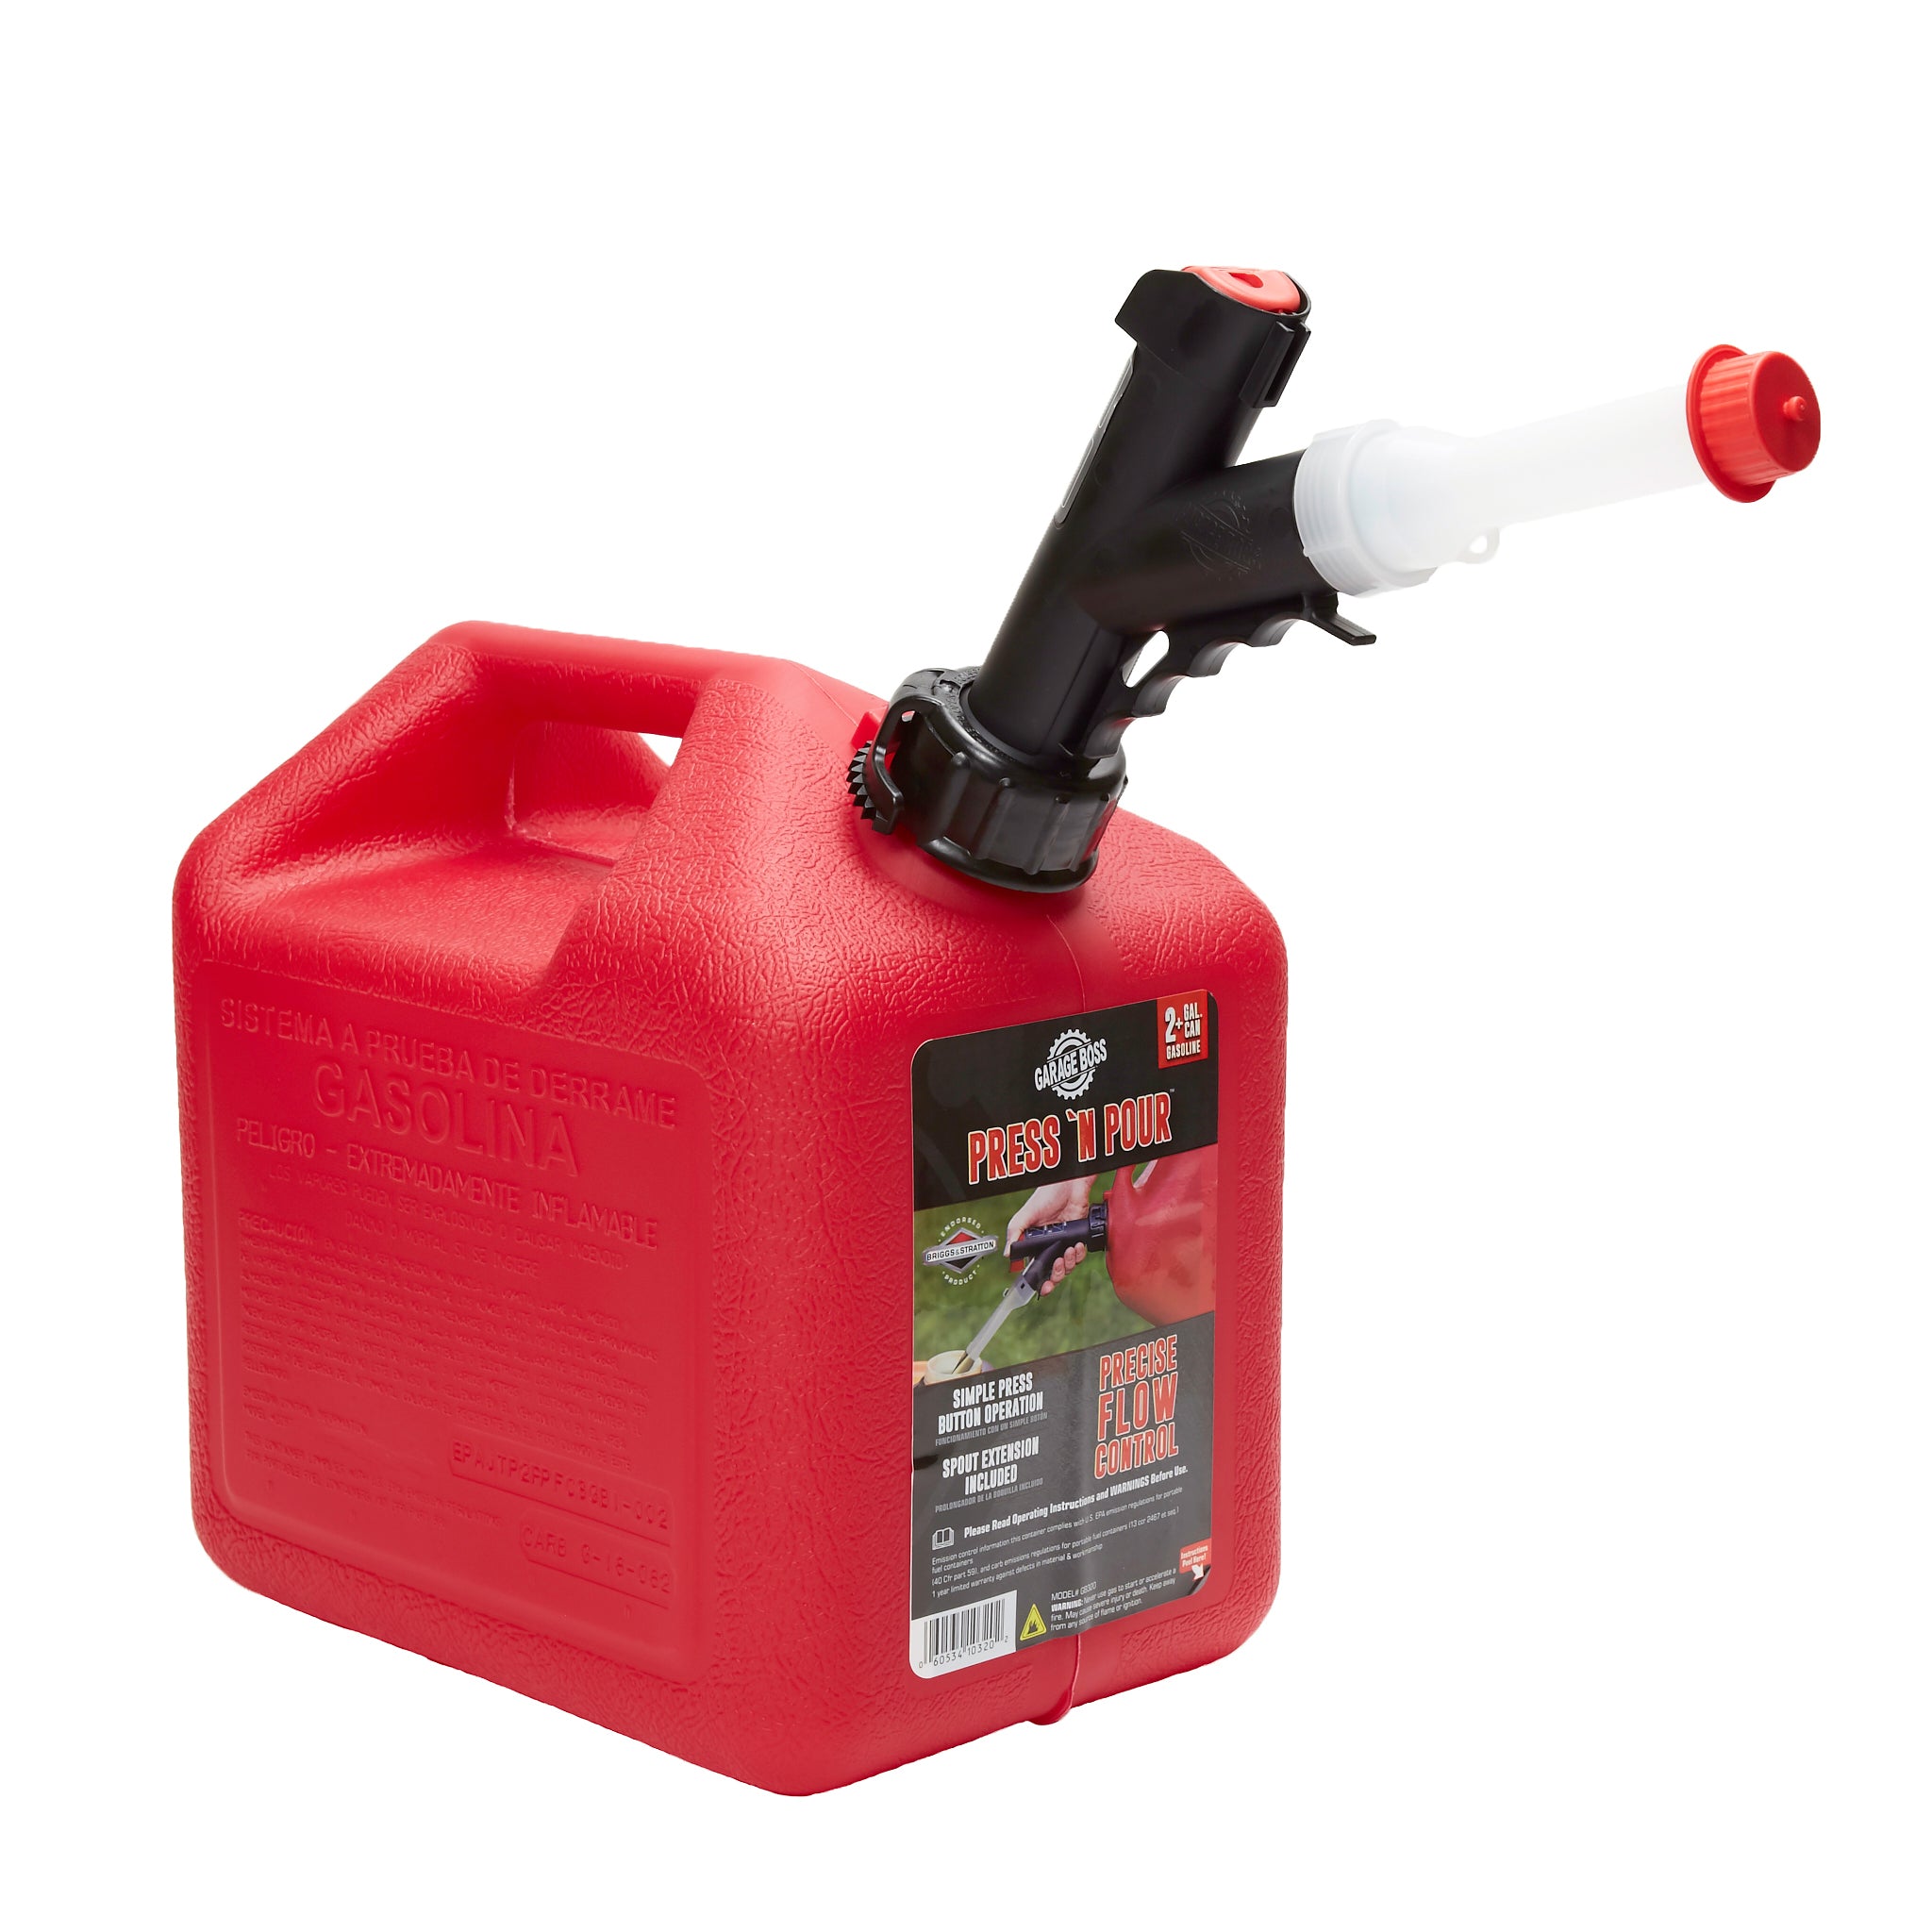 How to Use a Gas Can: Spill-Proof & Quick-Flow Spouts